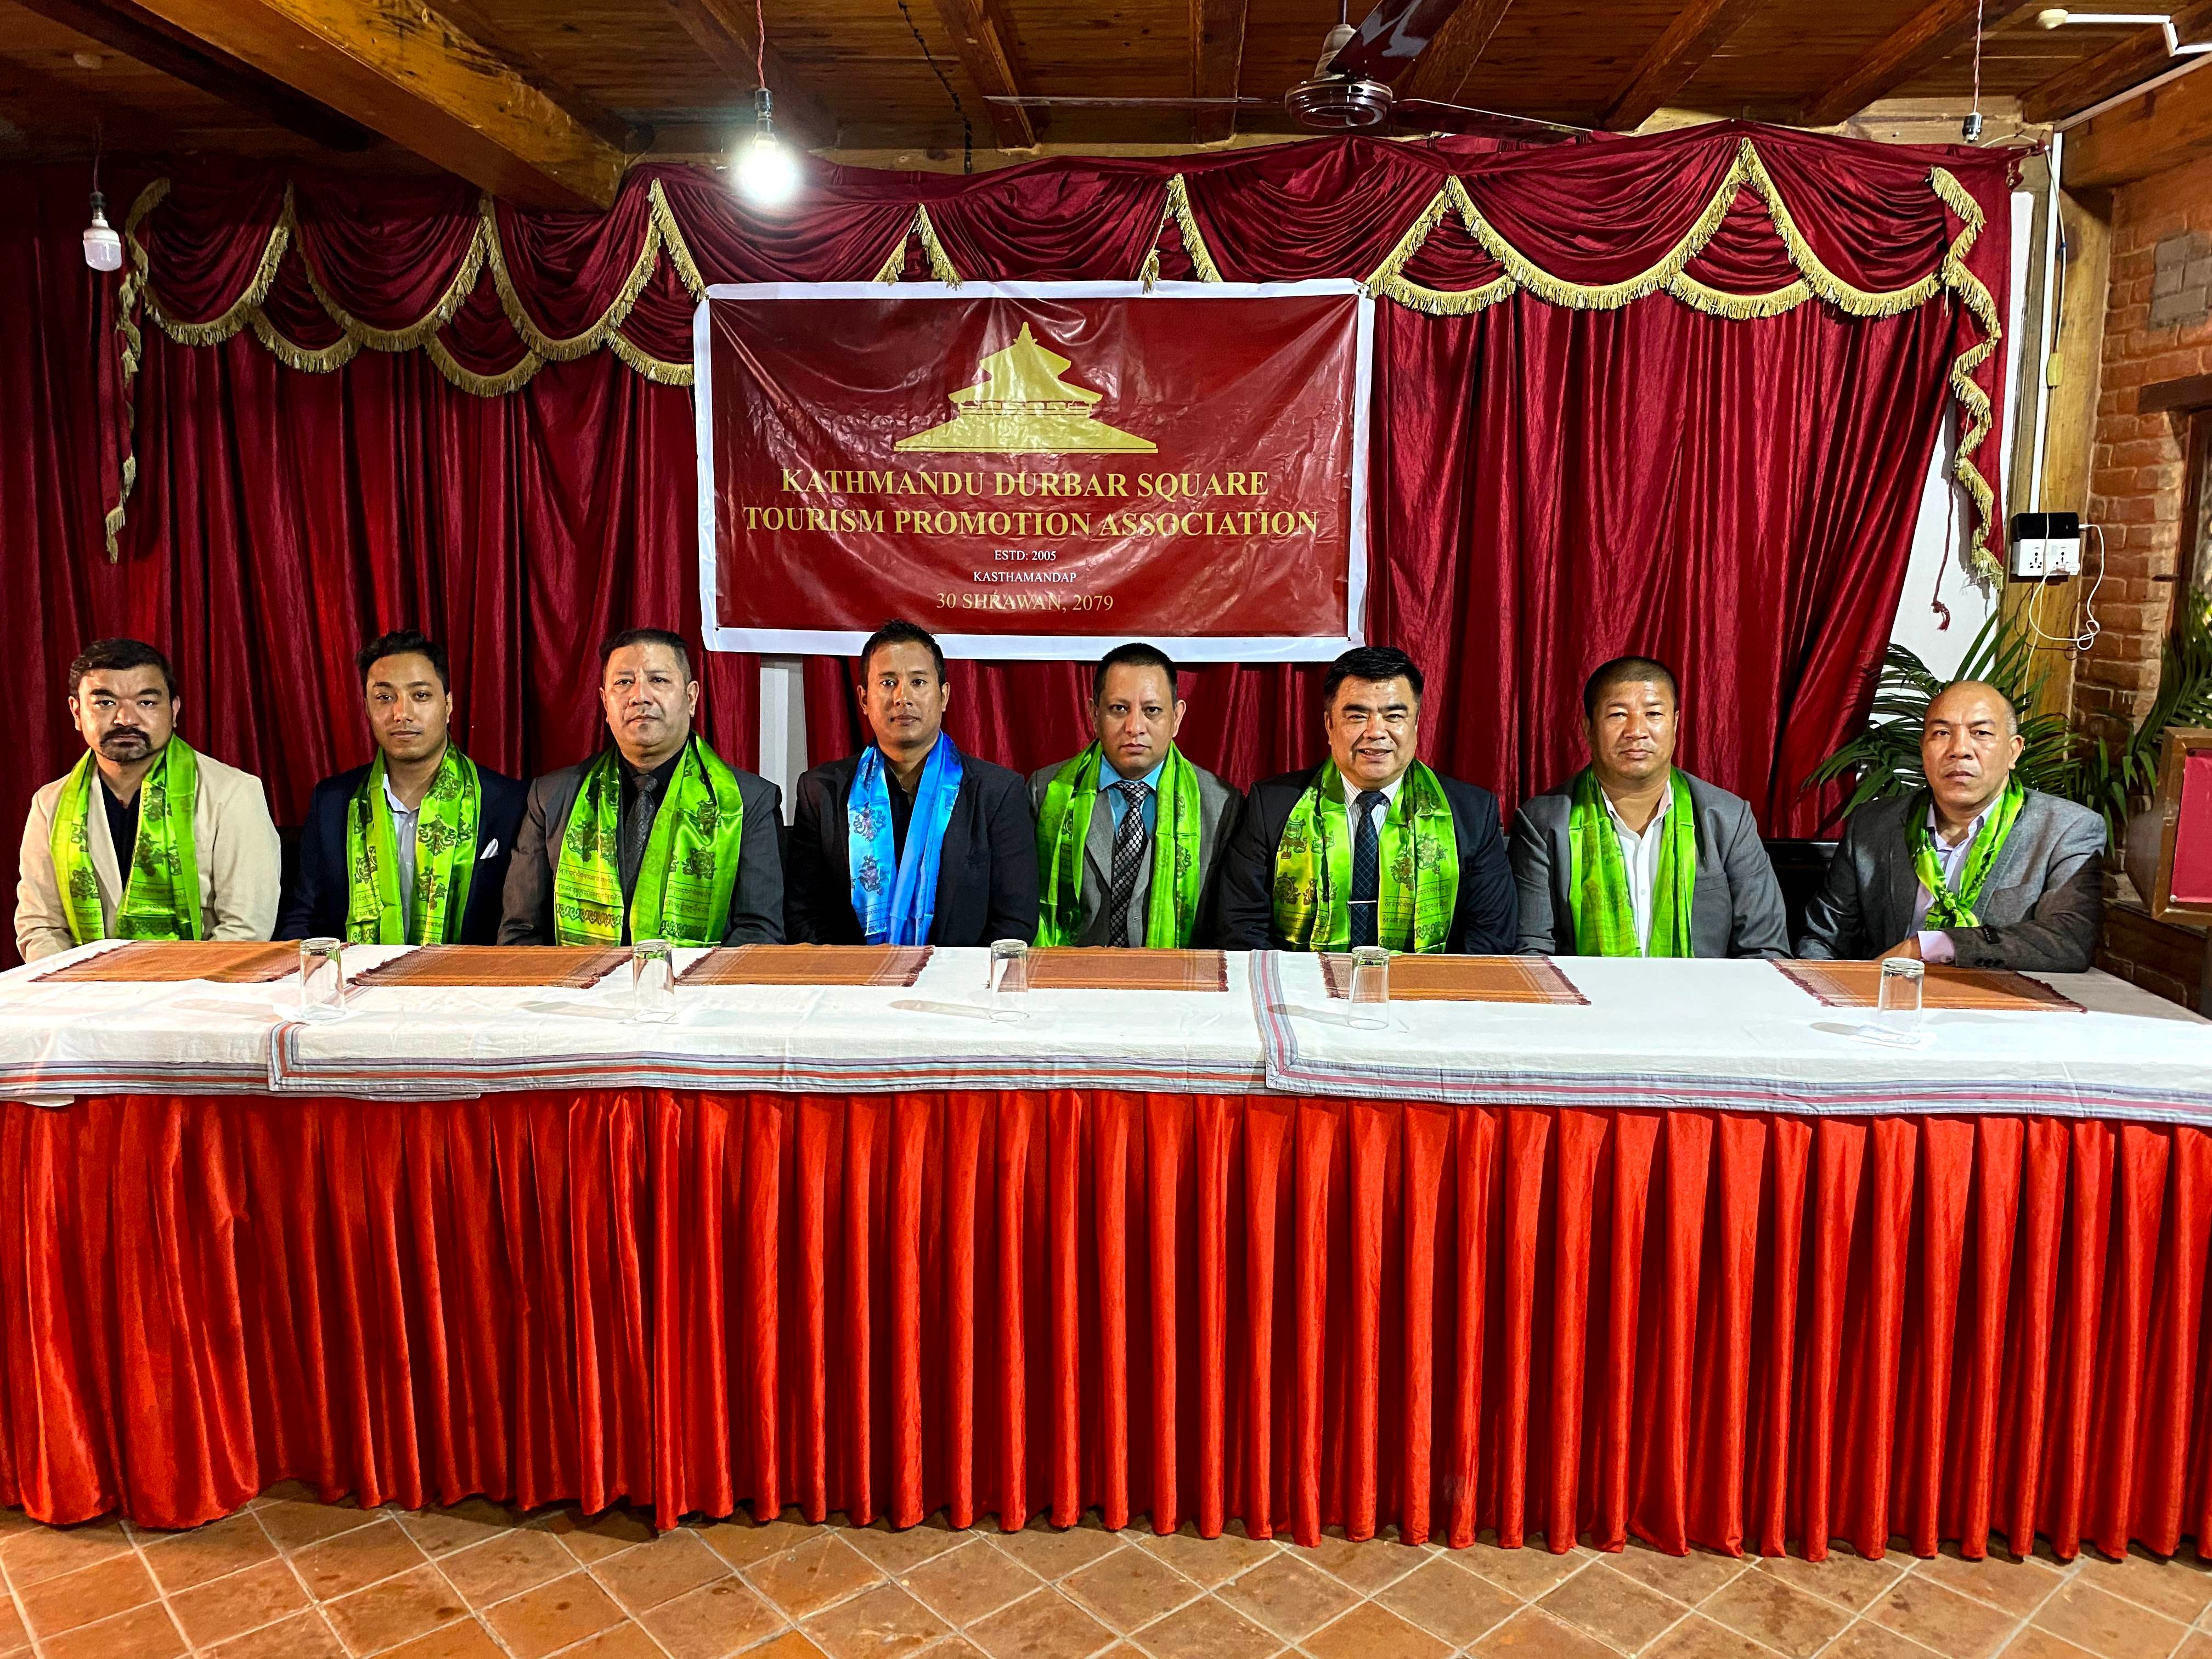 Kathmandu Durbar Square Tourism Promotion Association forms new Working Committee